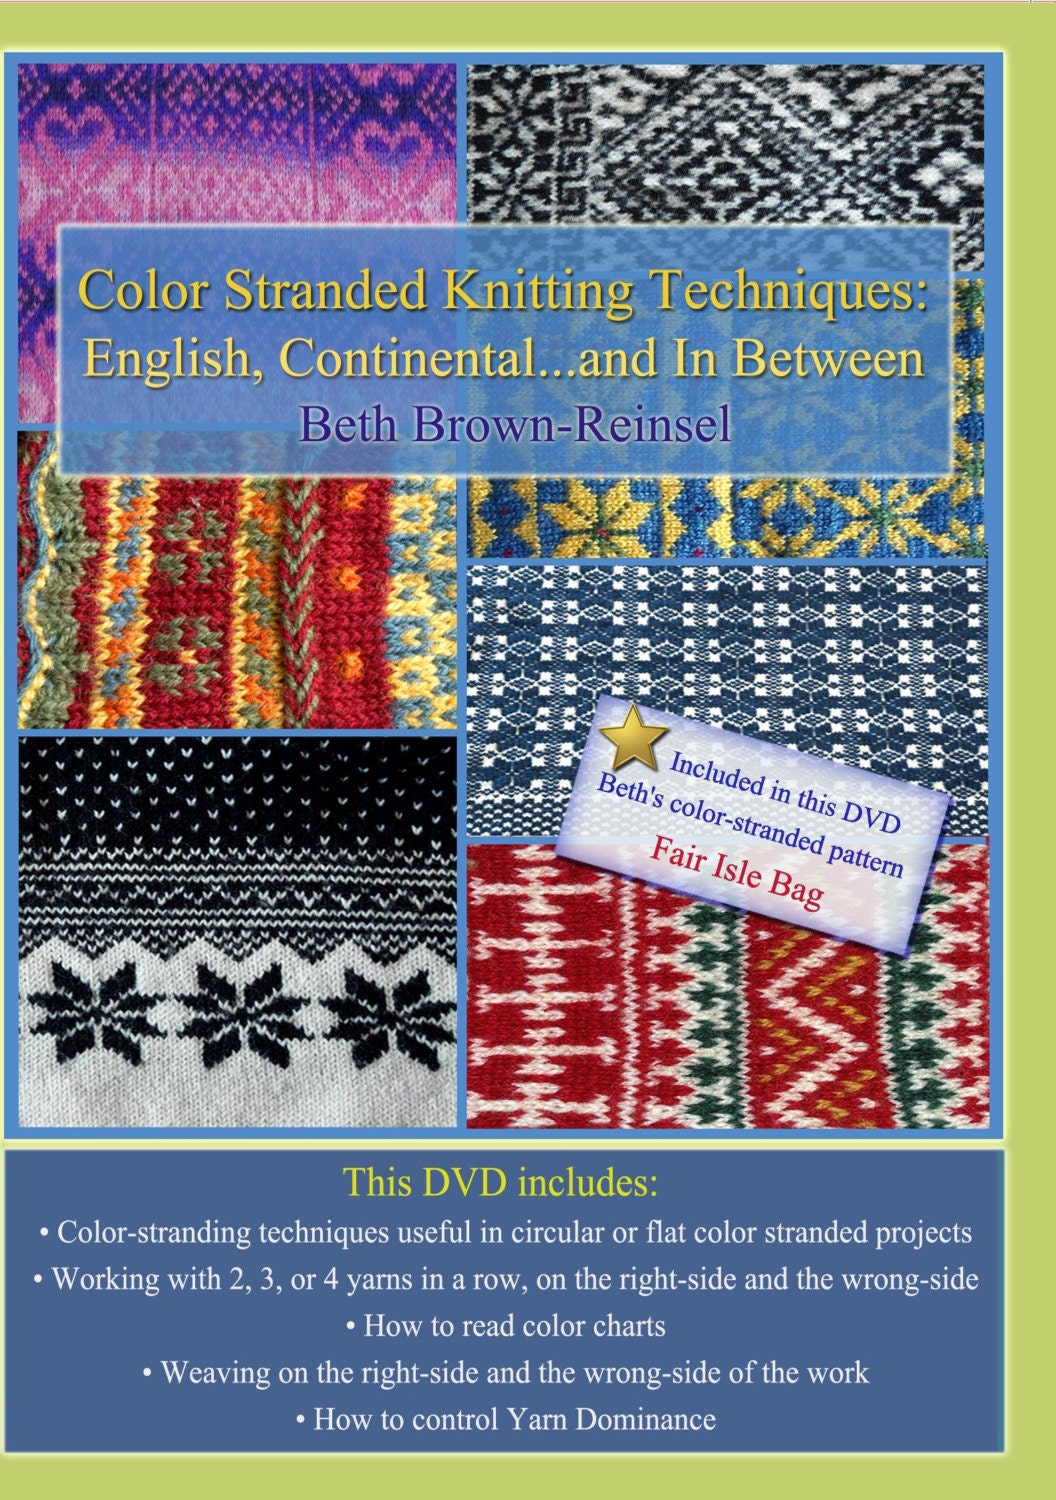 Color Stranded Knitting Techniques DVD